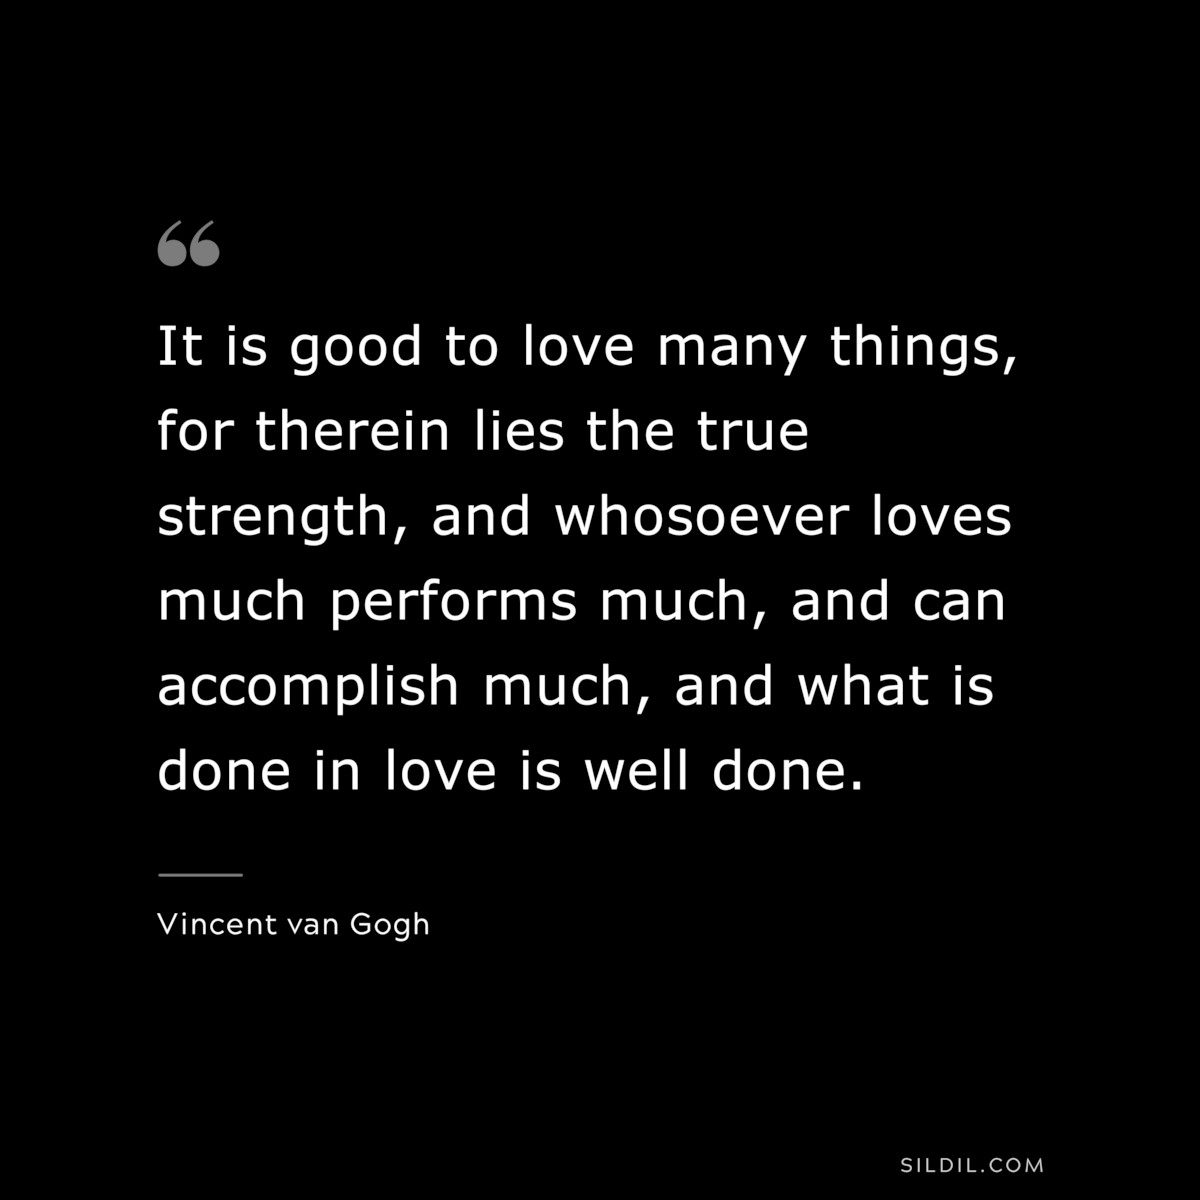 It is good to love many things, for therein lies the true strength, and whosoever loves much performs much, and can accomplish much, and what is done in love is well done. ― Vincent van Gogh